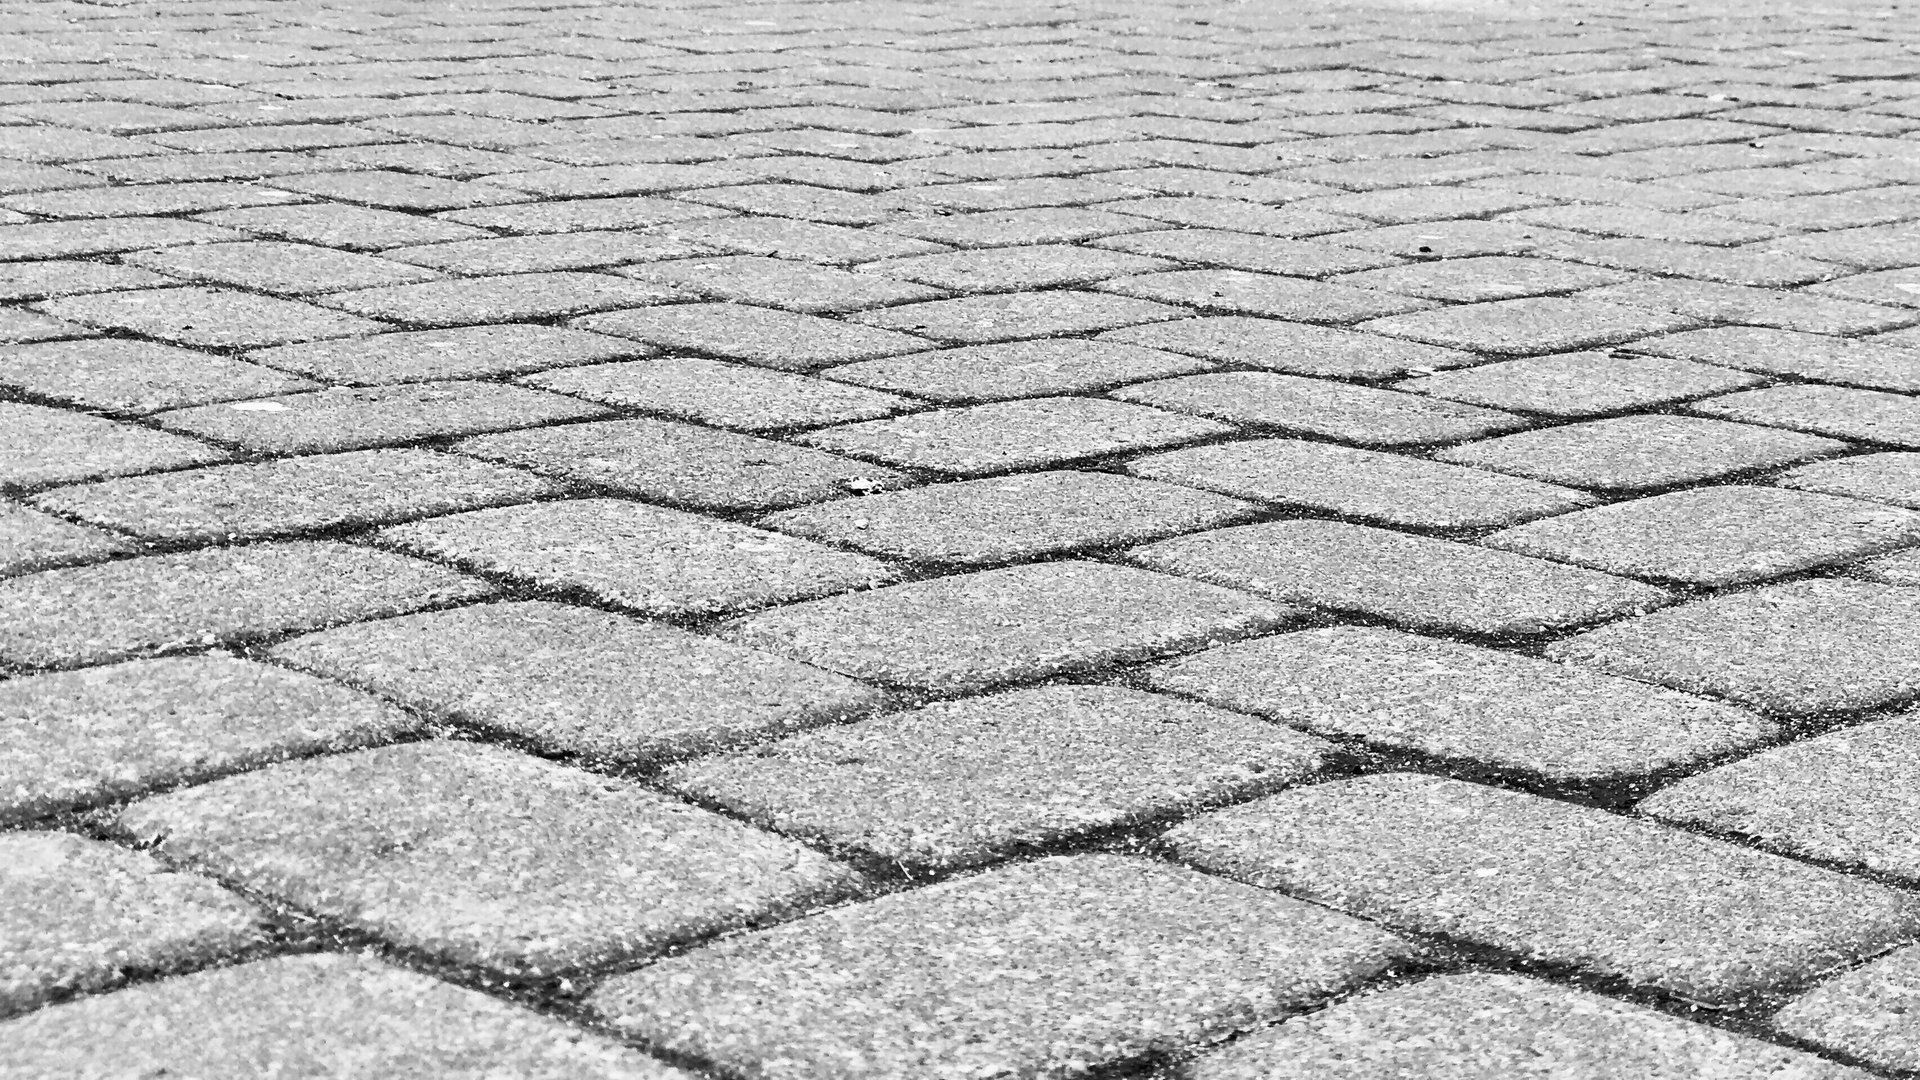 Accurate Paving Clifton (973)777-5885